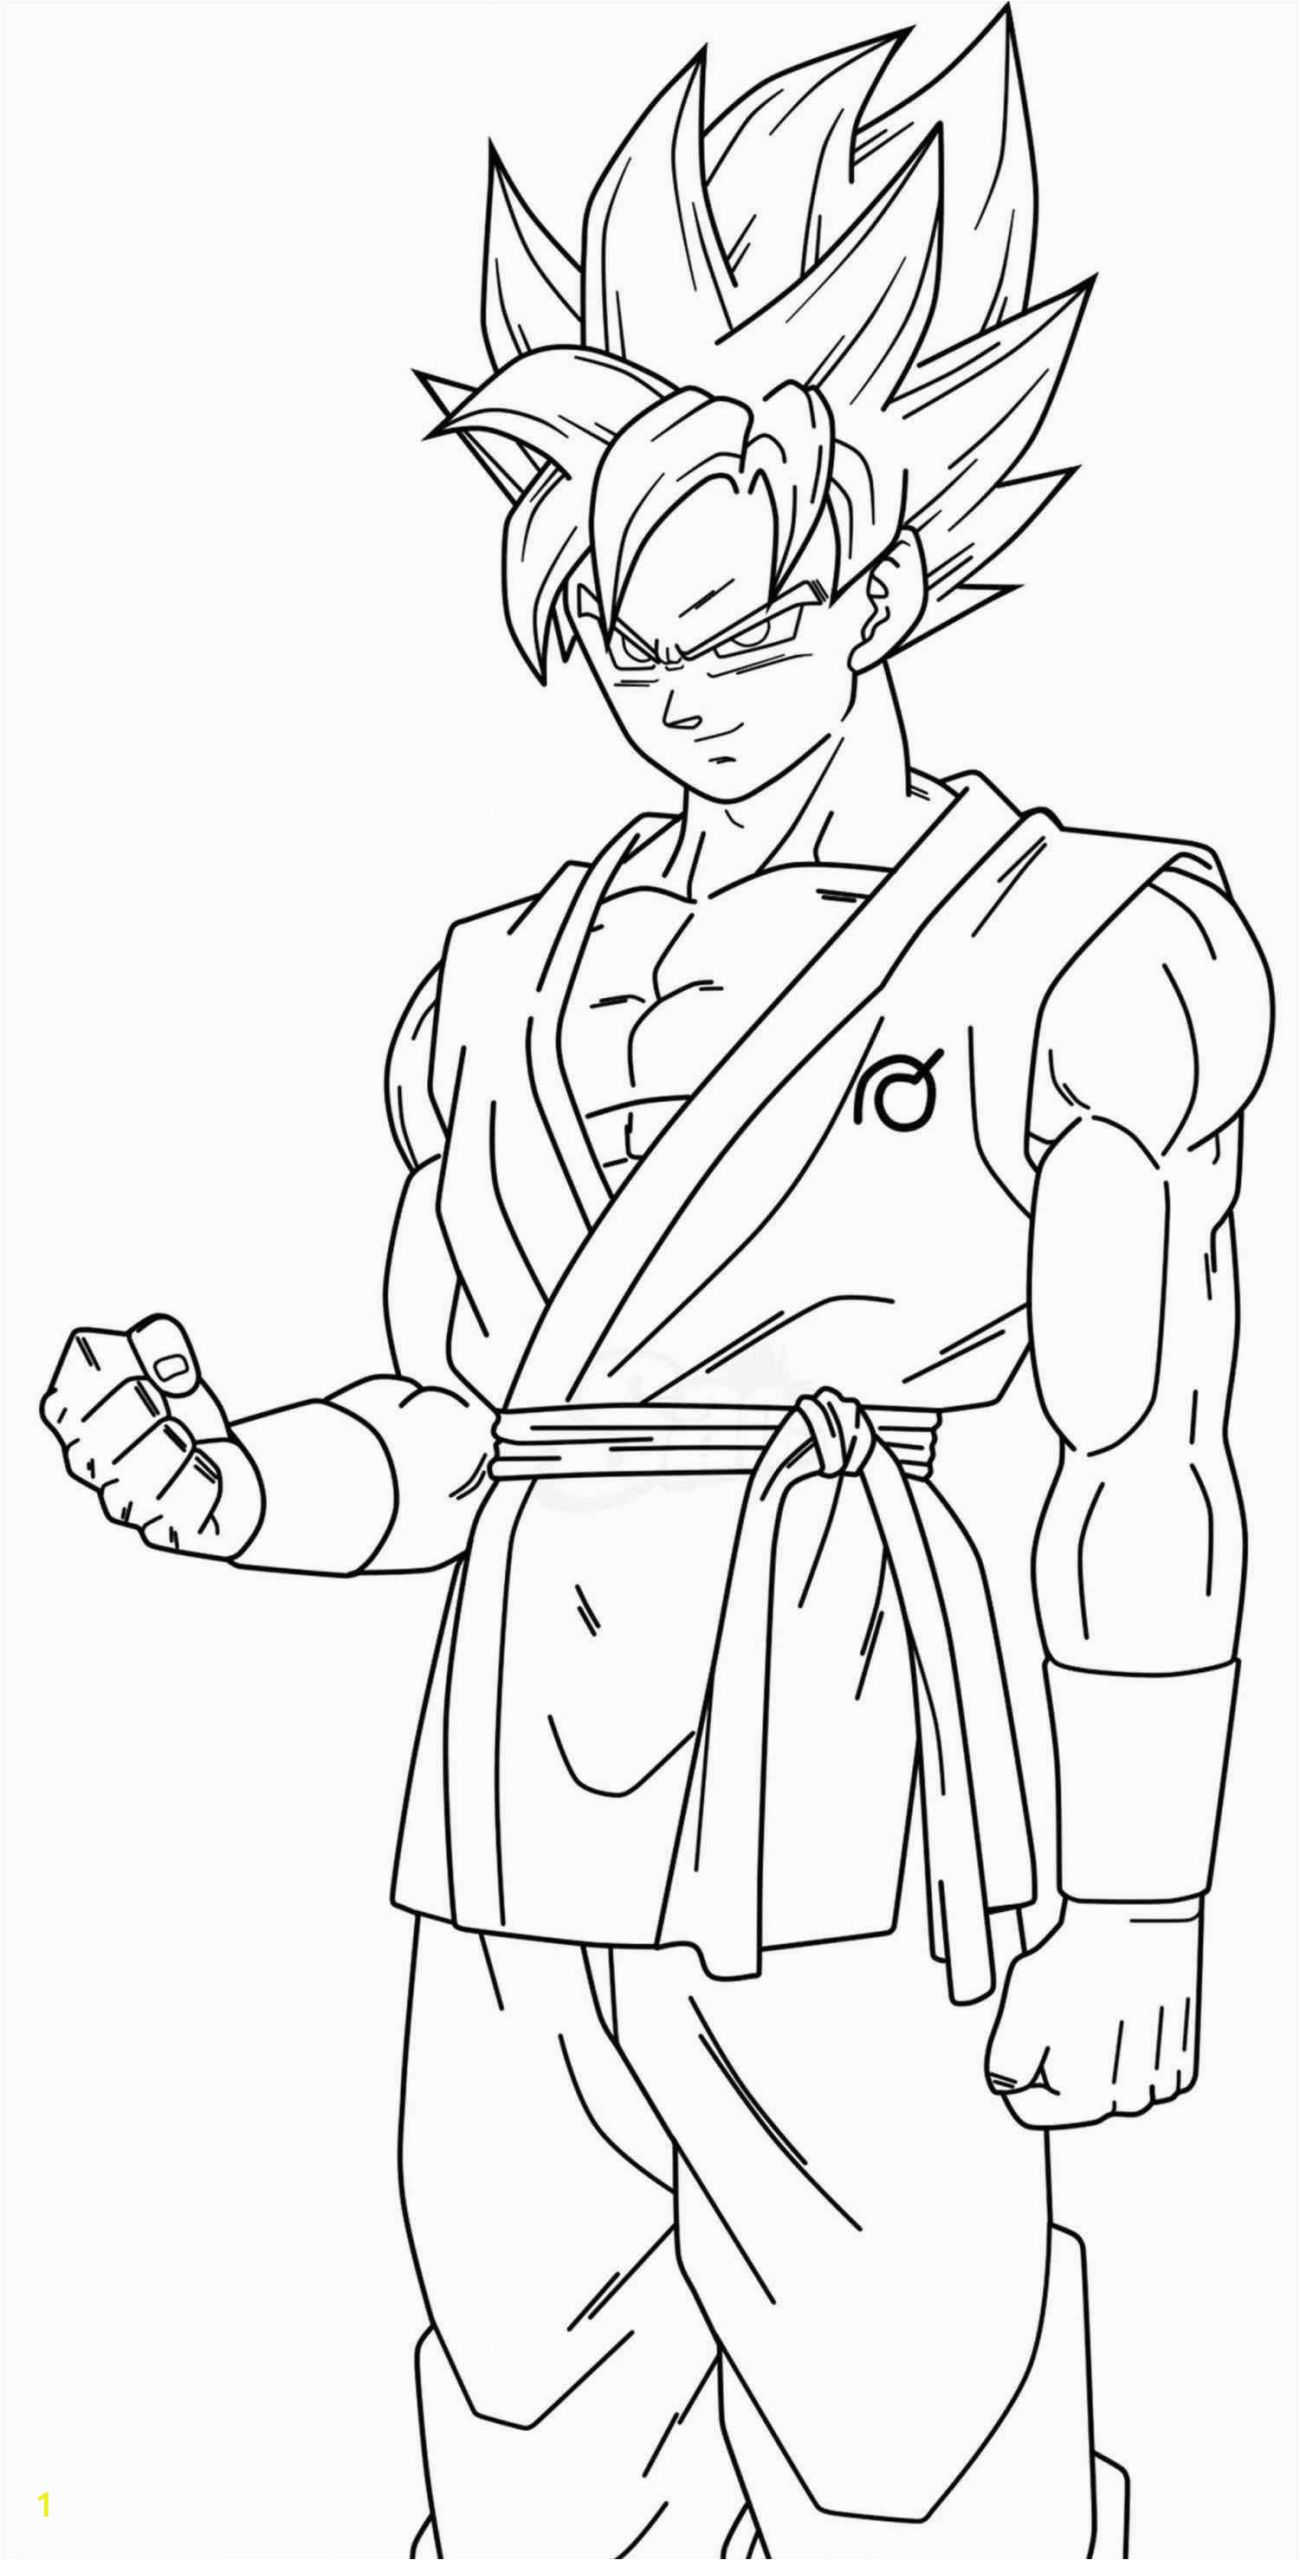 Goku Dragon Ball Super Coloring Pages Promising Goku Super Saiyan 1 Coloring Pages Best